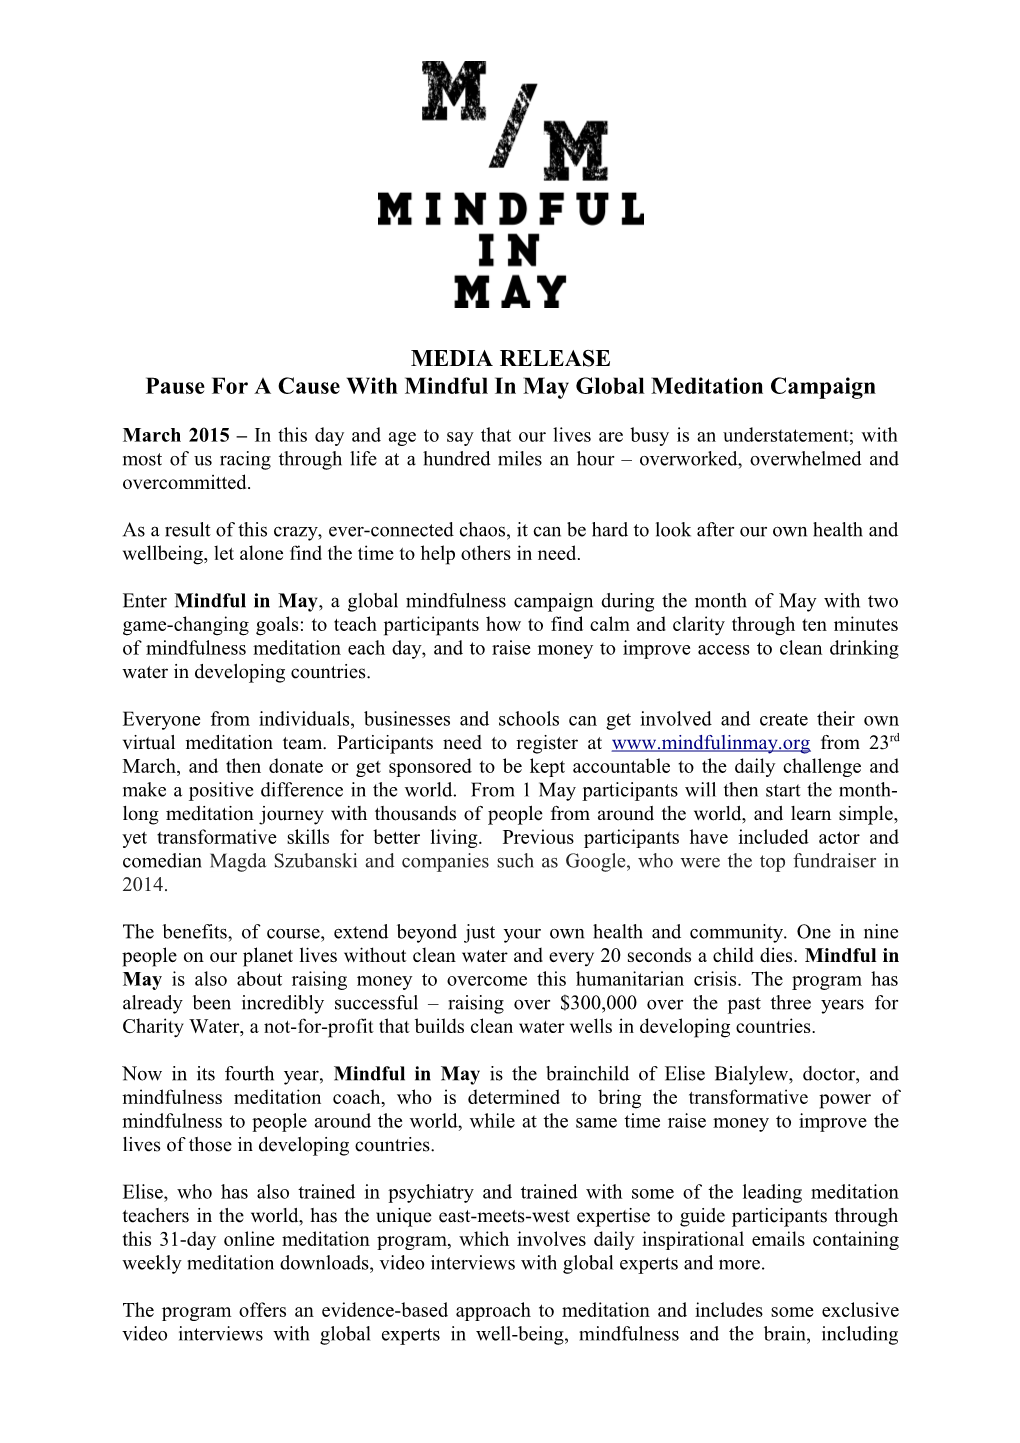 Mindful in May Media Release 2015 DRAFT